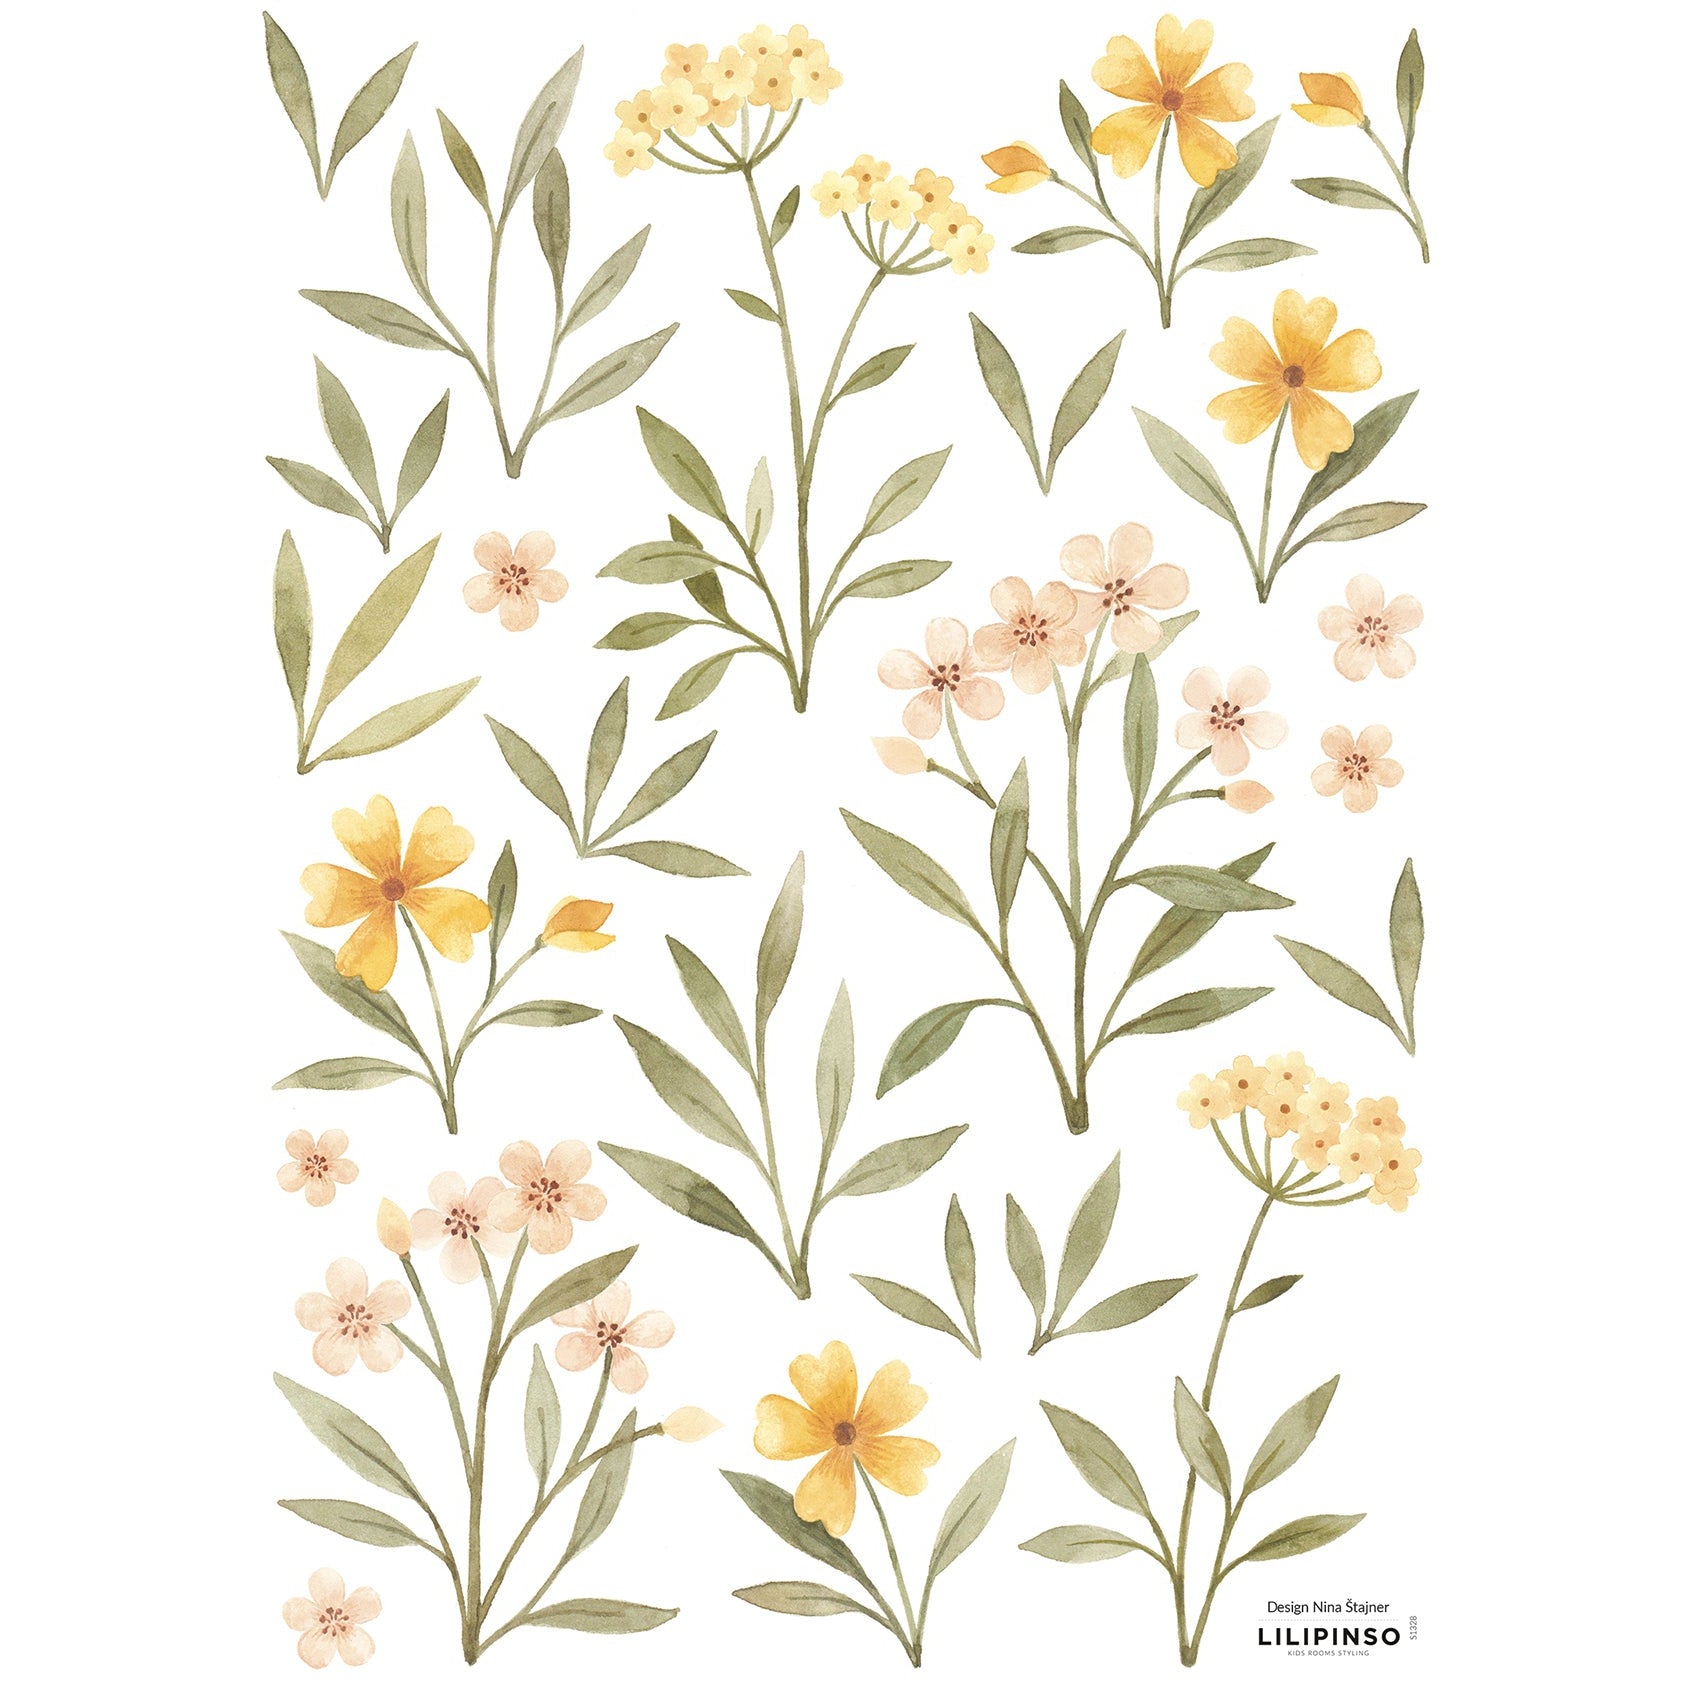 Lilipinso Wall Decals A3 - Orange And Yellow Flowers Wall decal